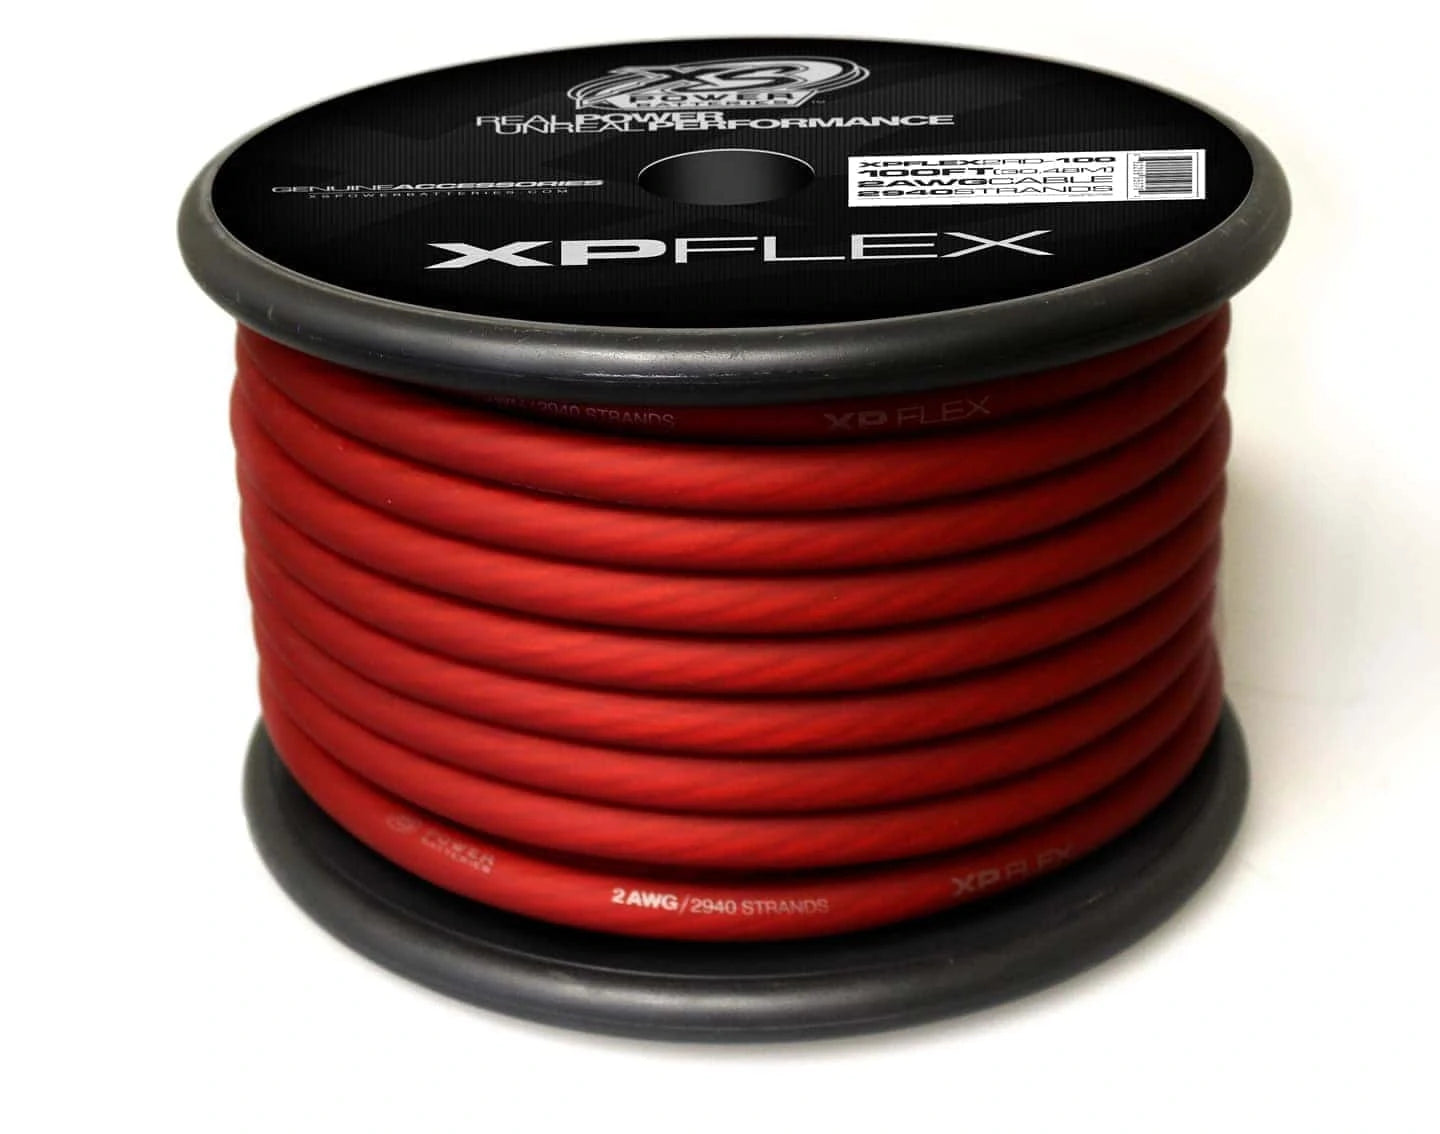 XS Power 2 AWG Gauge XP Flex Car Audio Power and Ground Cable 100ft spool